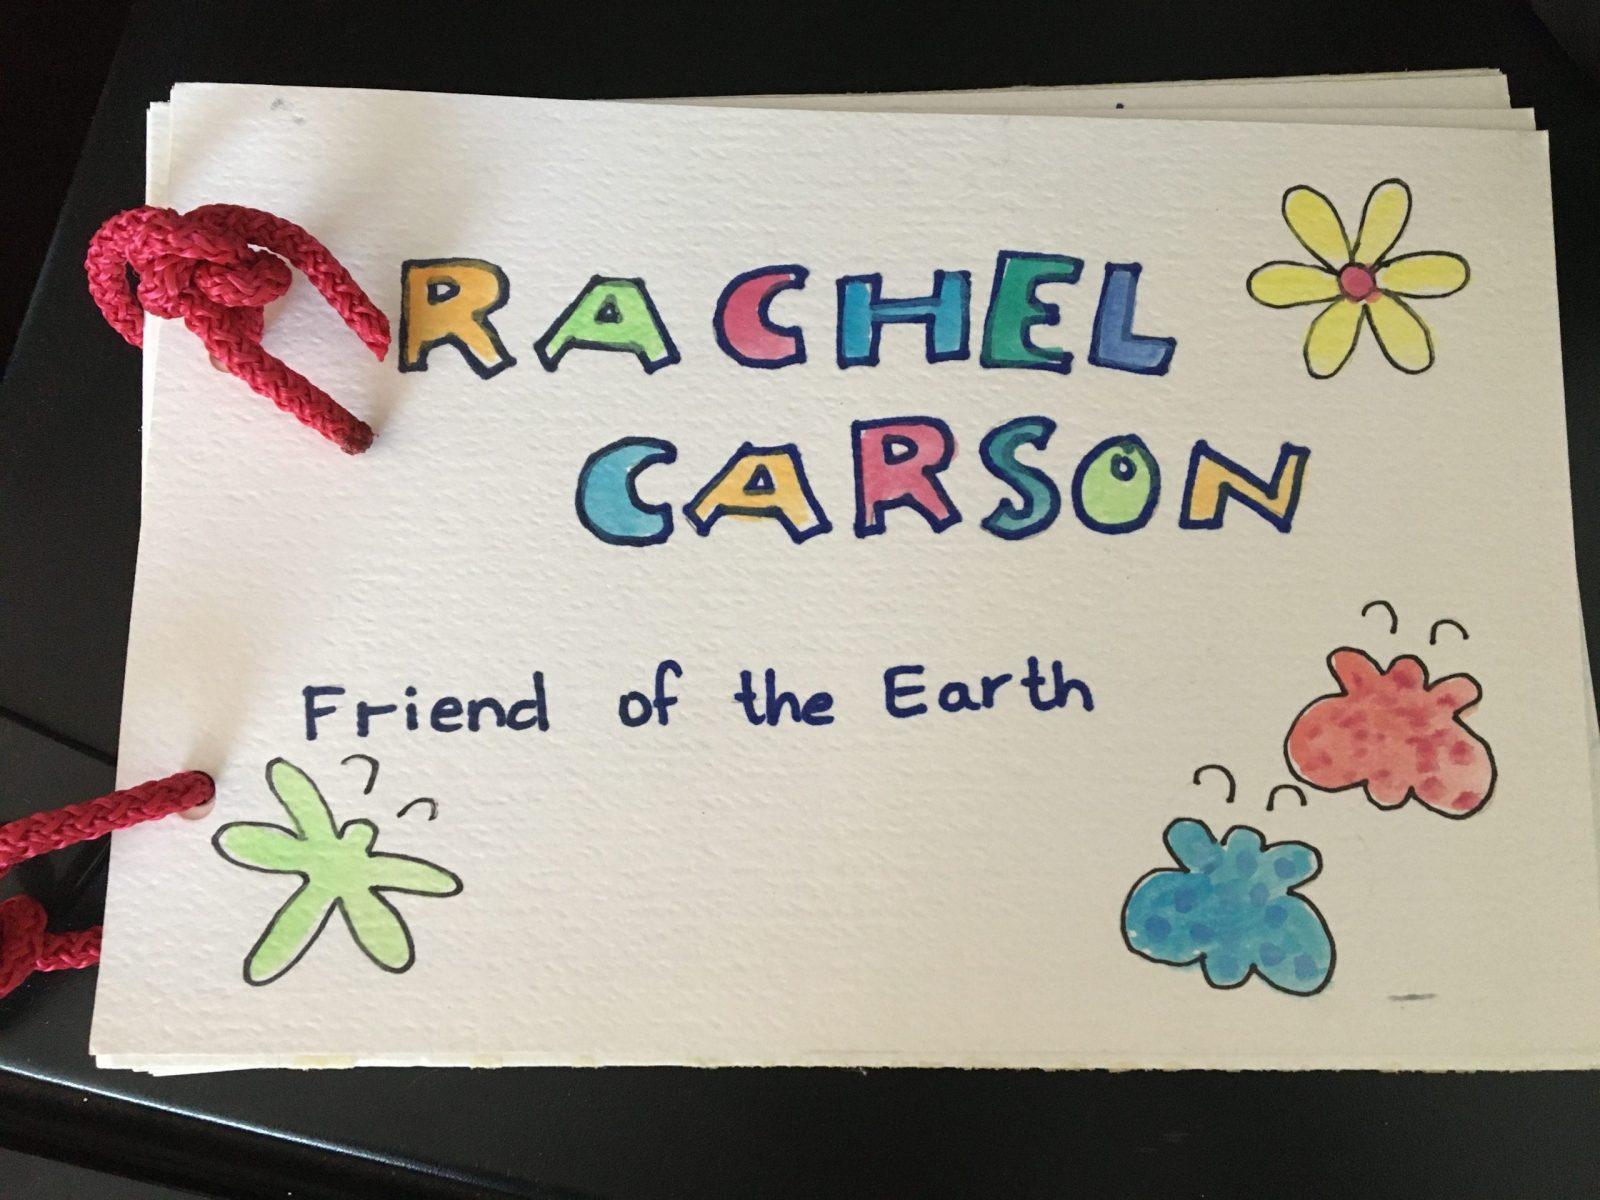 Lauren's 6th grade project on Rachel Carson inspired her to work to protect the environment.